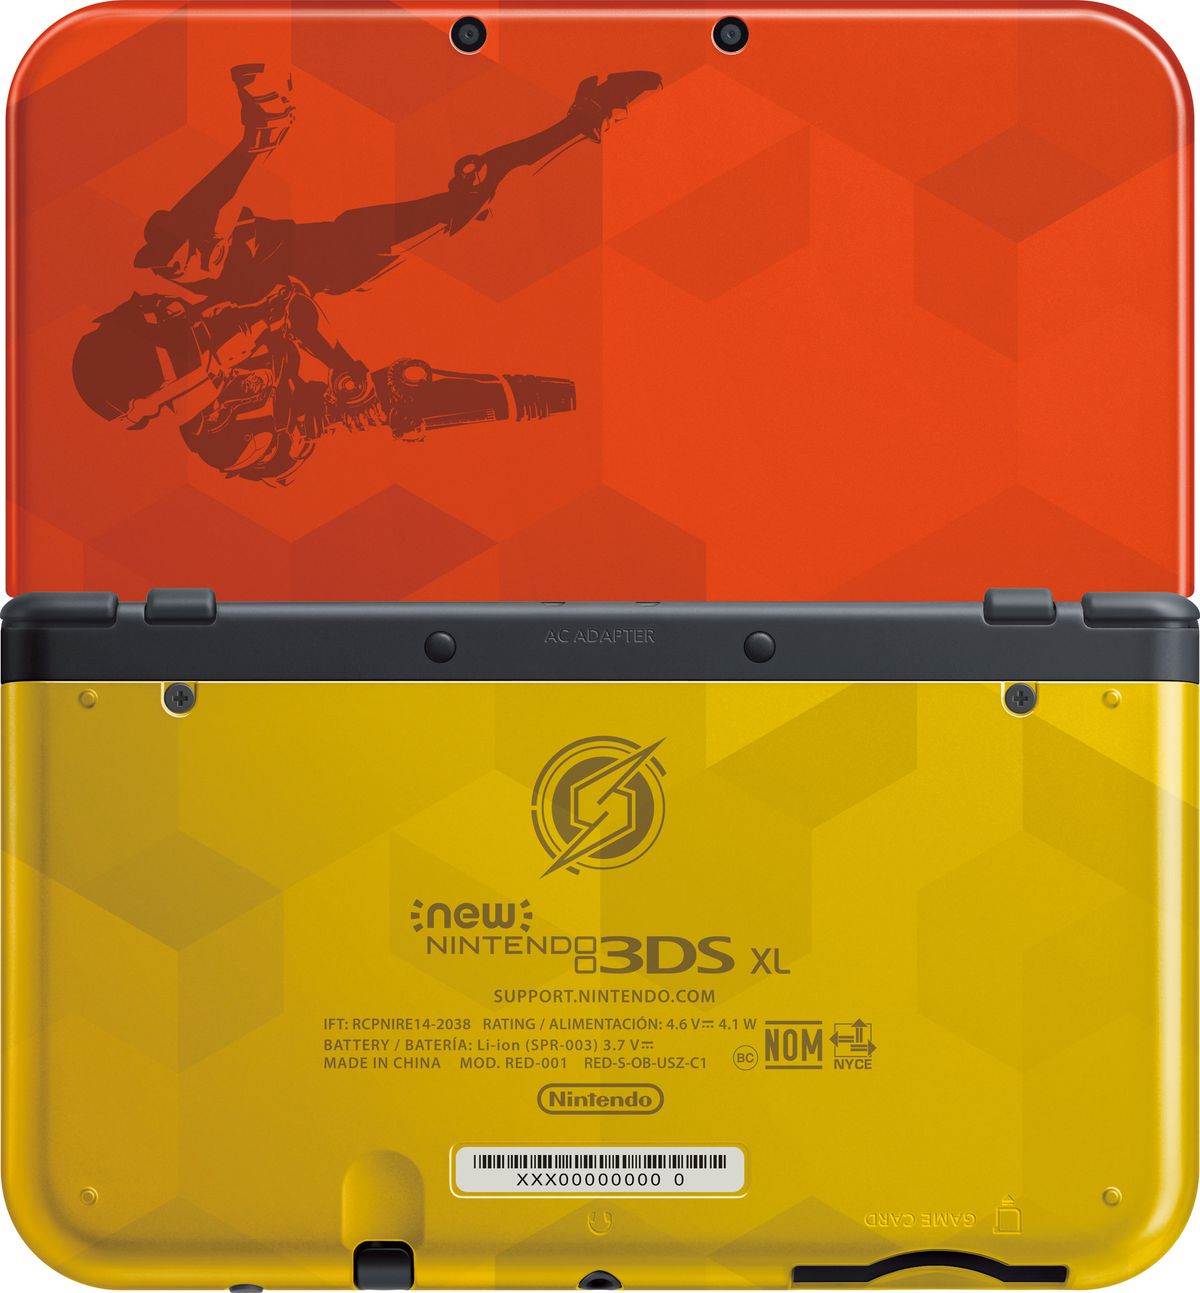 An image of the back of the New Nintendo 3DS XL Samus Edition